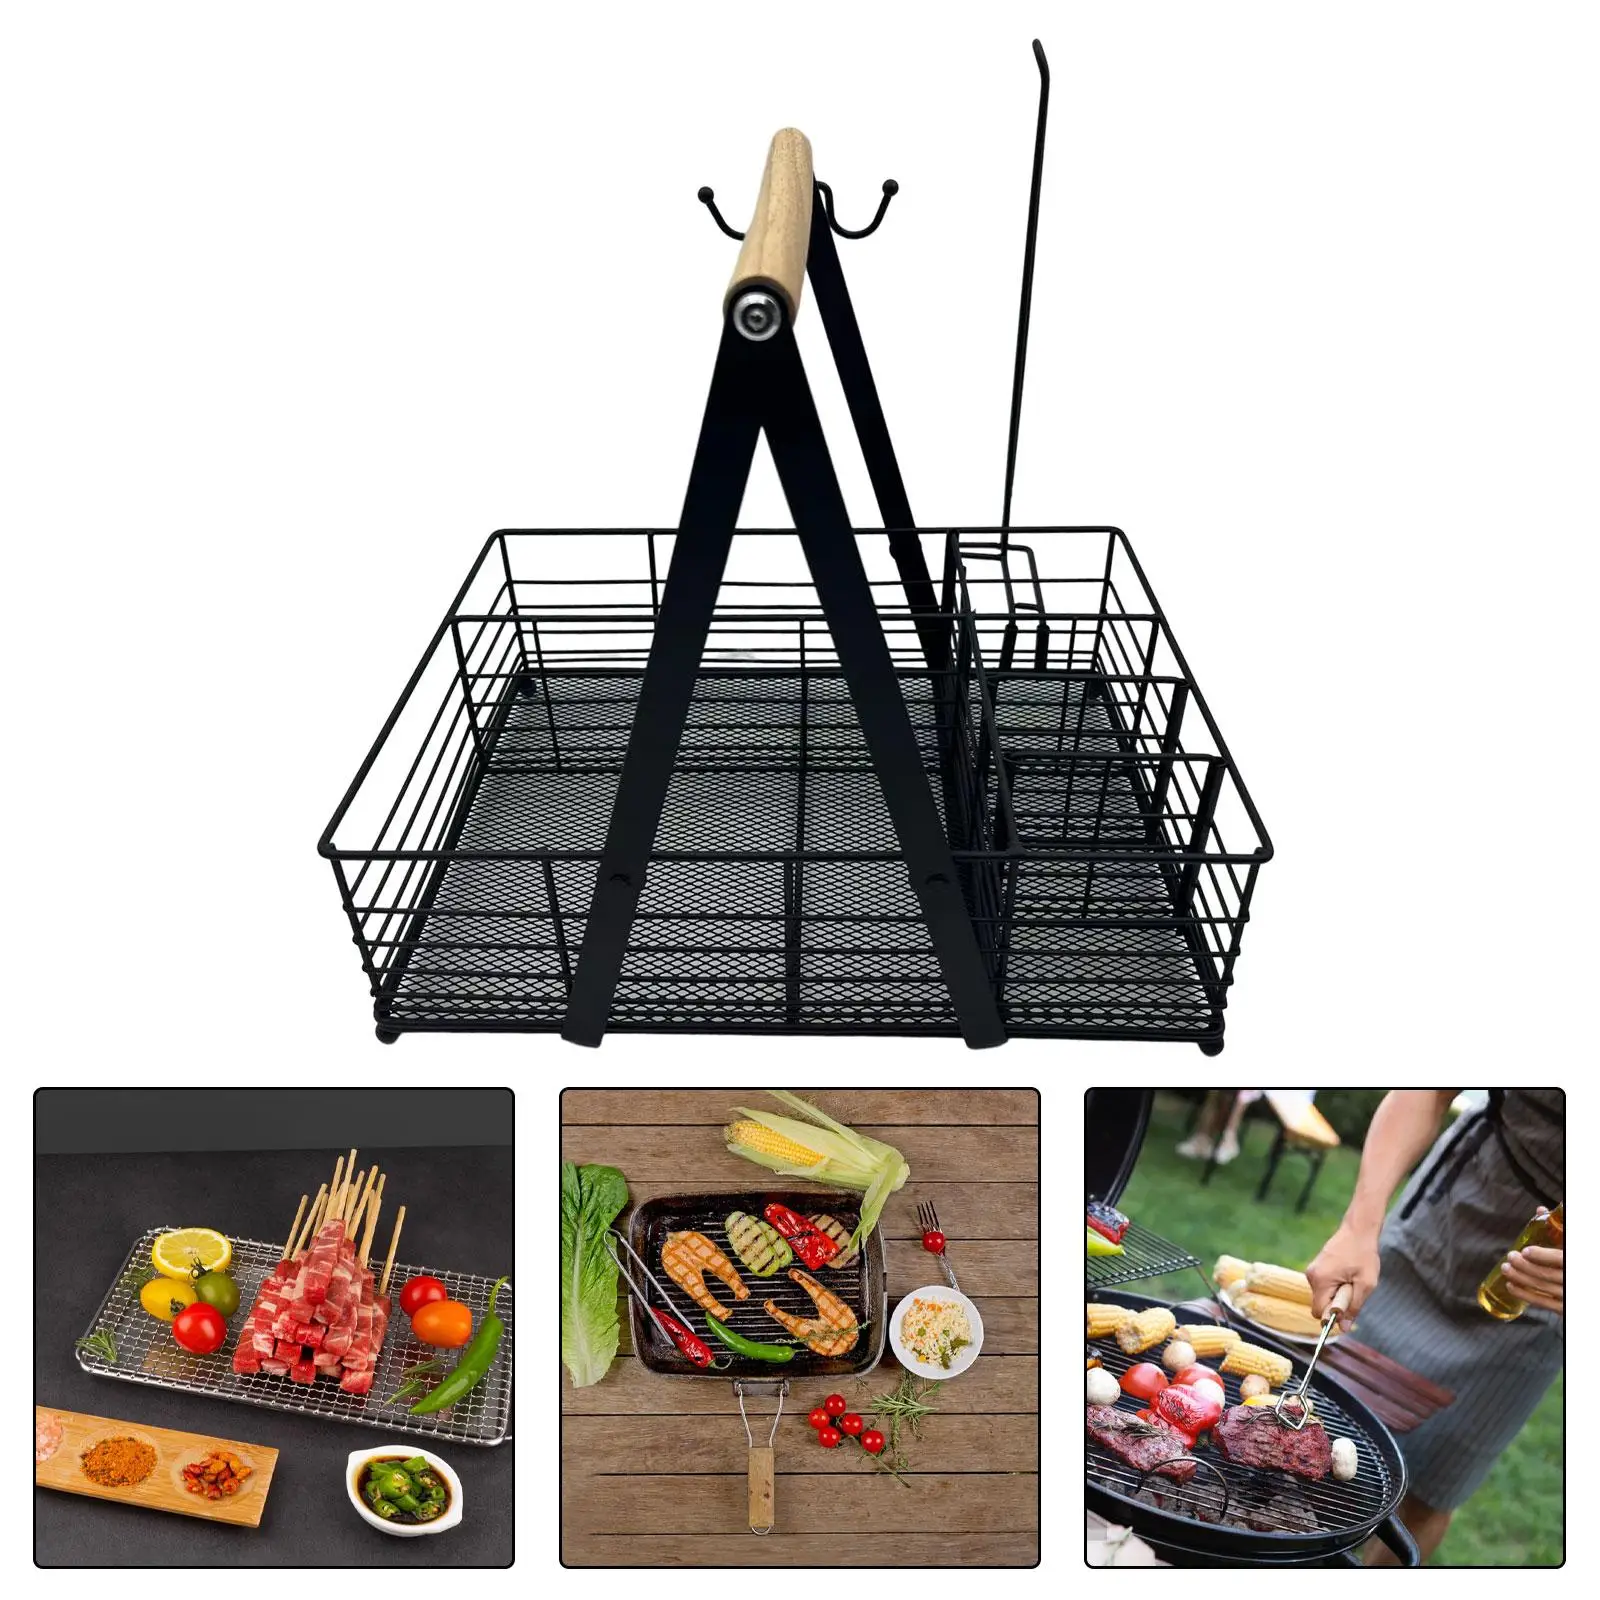 BBQ Grilling Caddy with Paper Towel Holder Easily Install Sturdy with 6 Compartments for Storing Condiments, Plates, Tableware